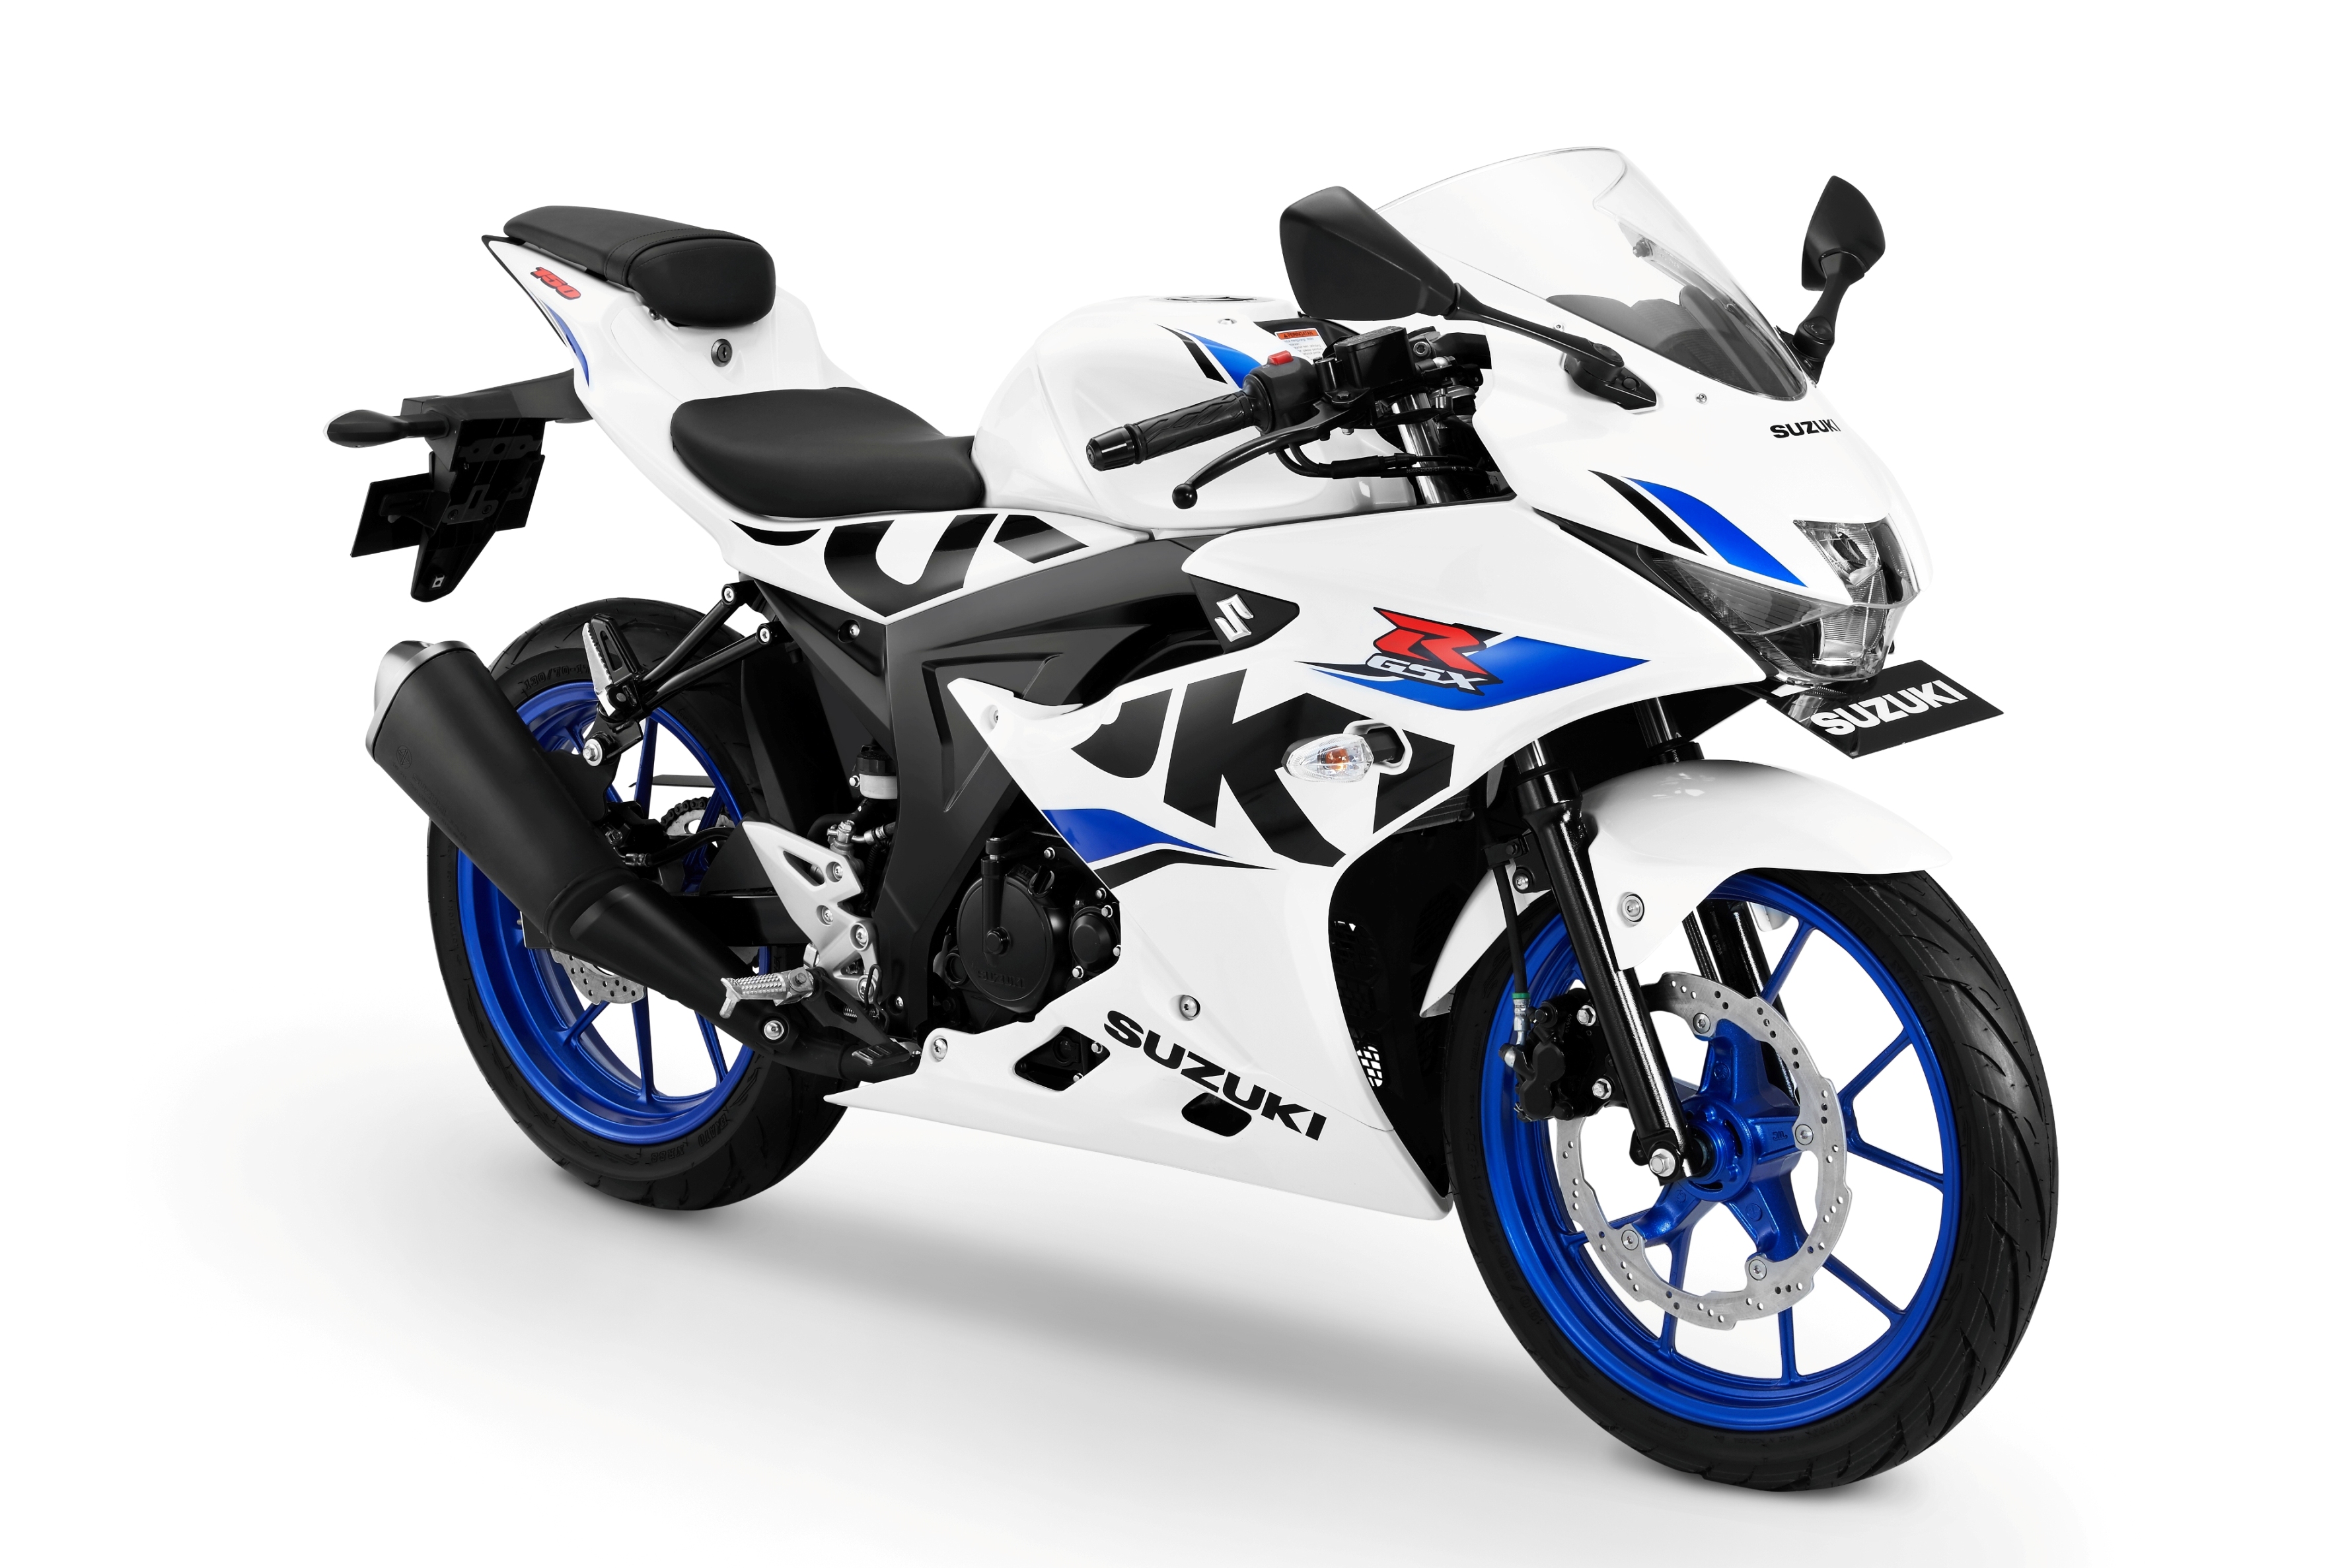 2018 Suzuki GSX-R150 new white colour variant launched in Indonesia